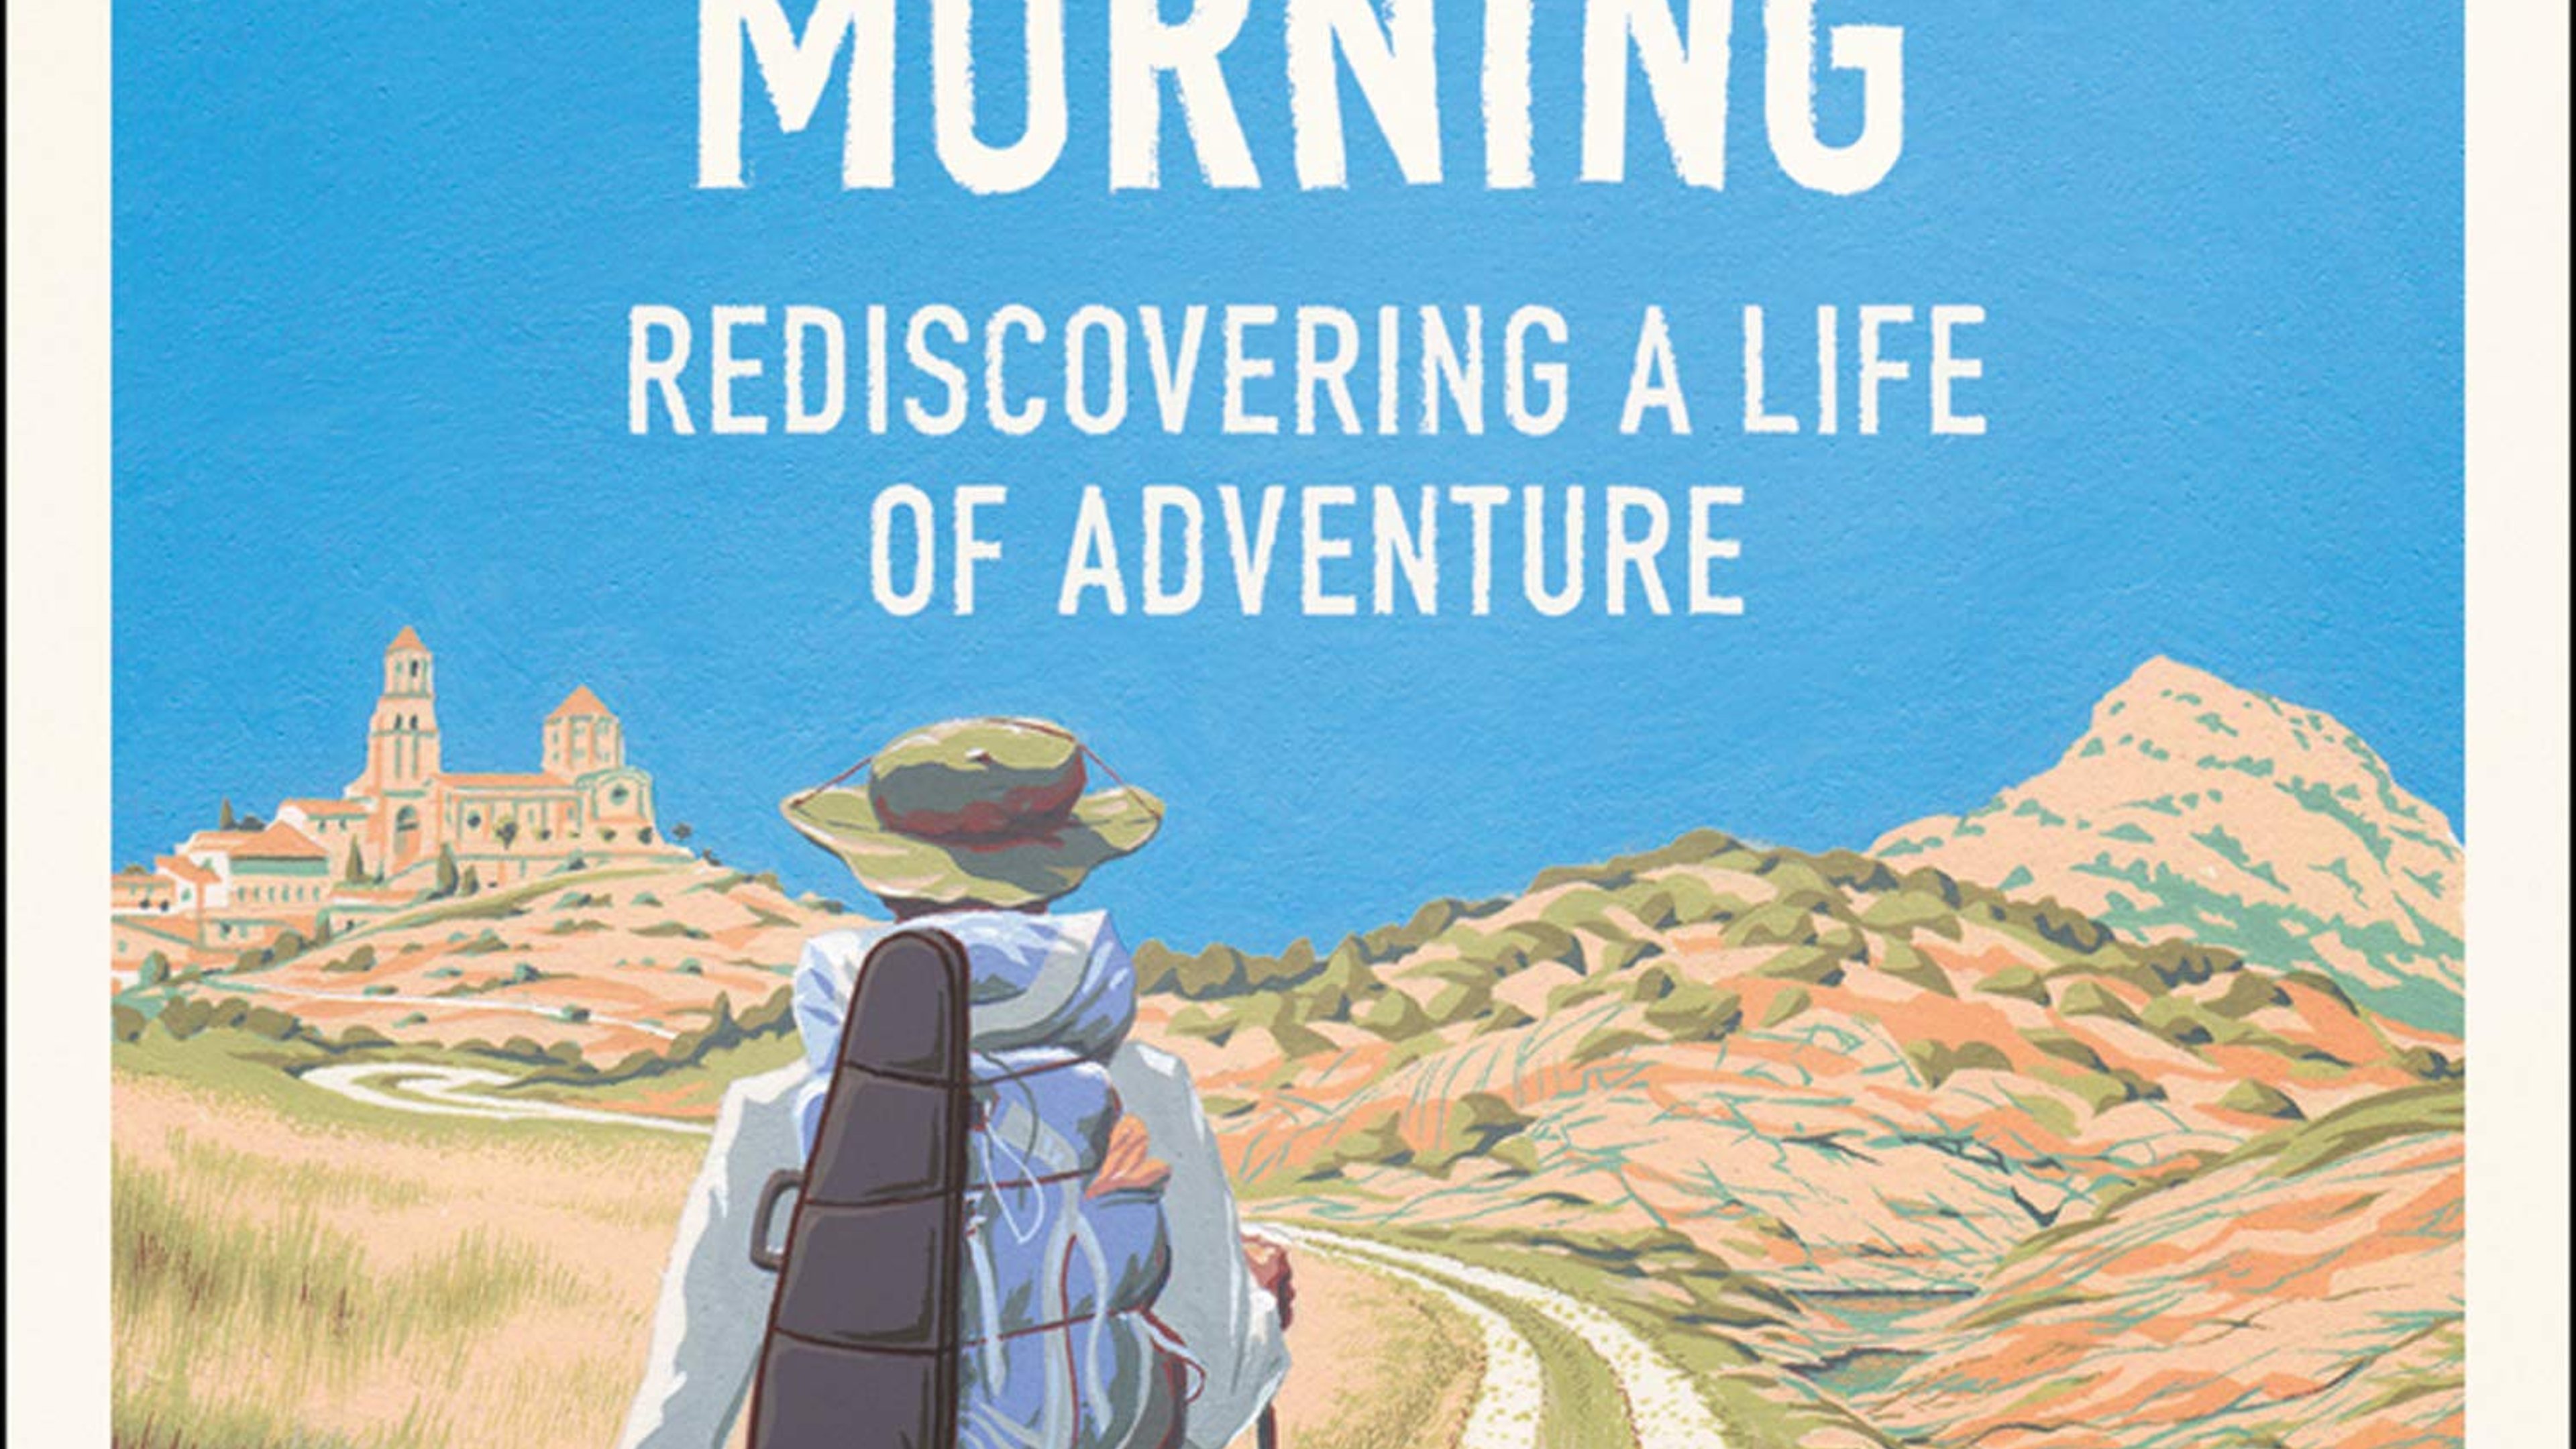 My Midsummer Morning: Rediscovering a Life of Adventure